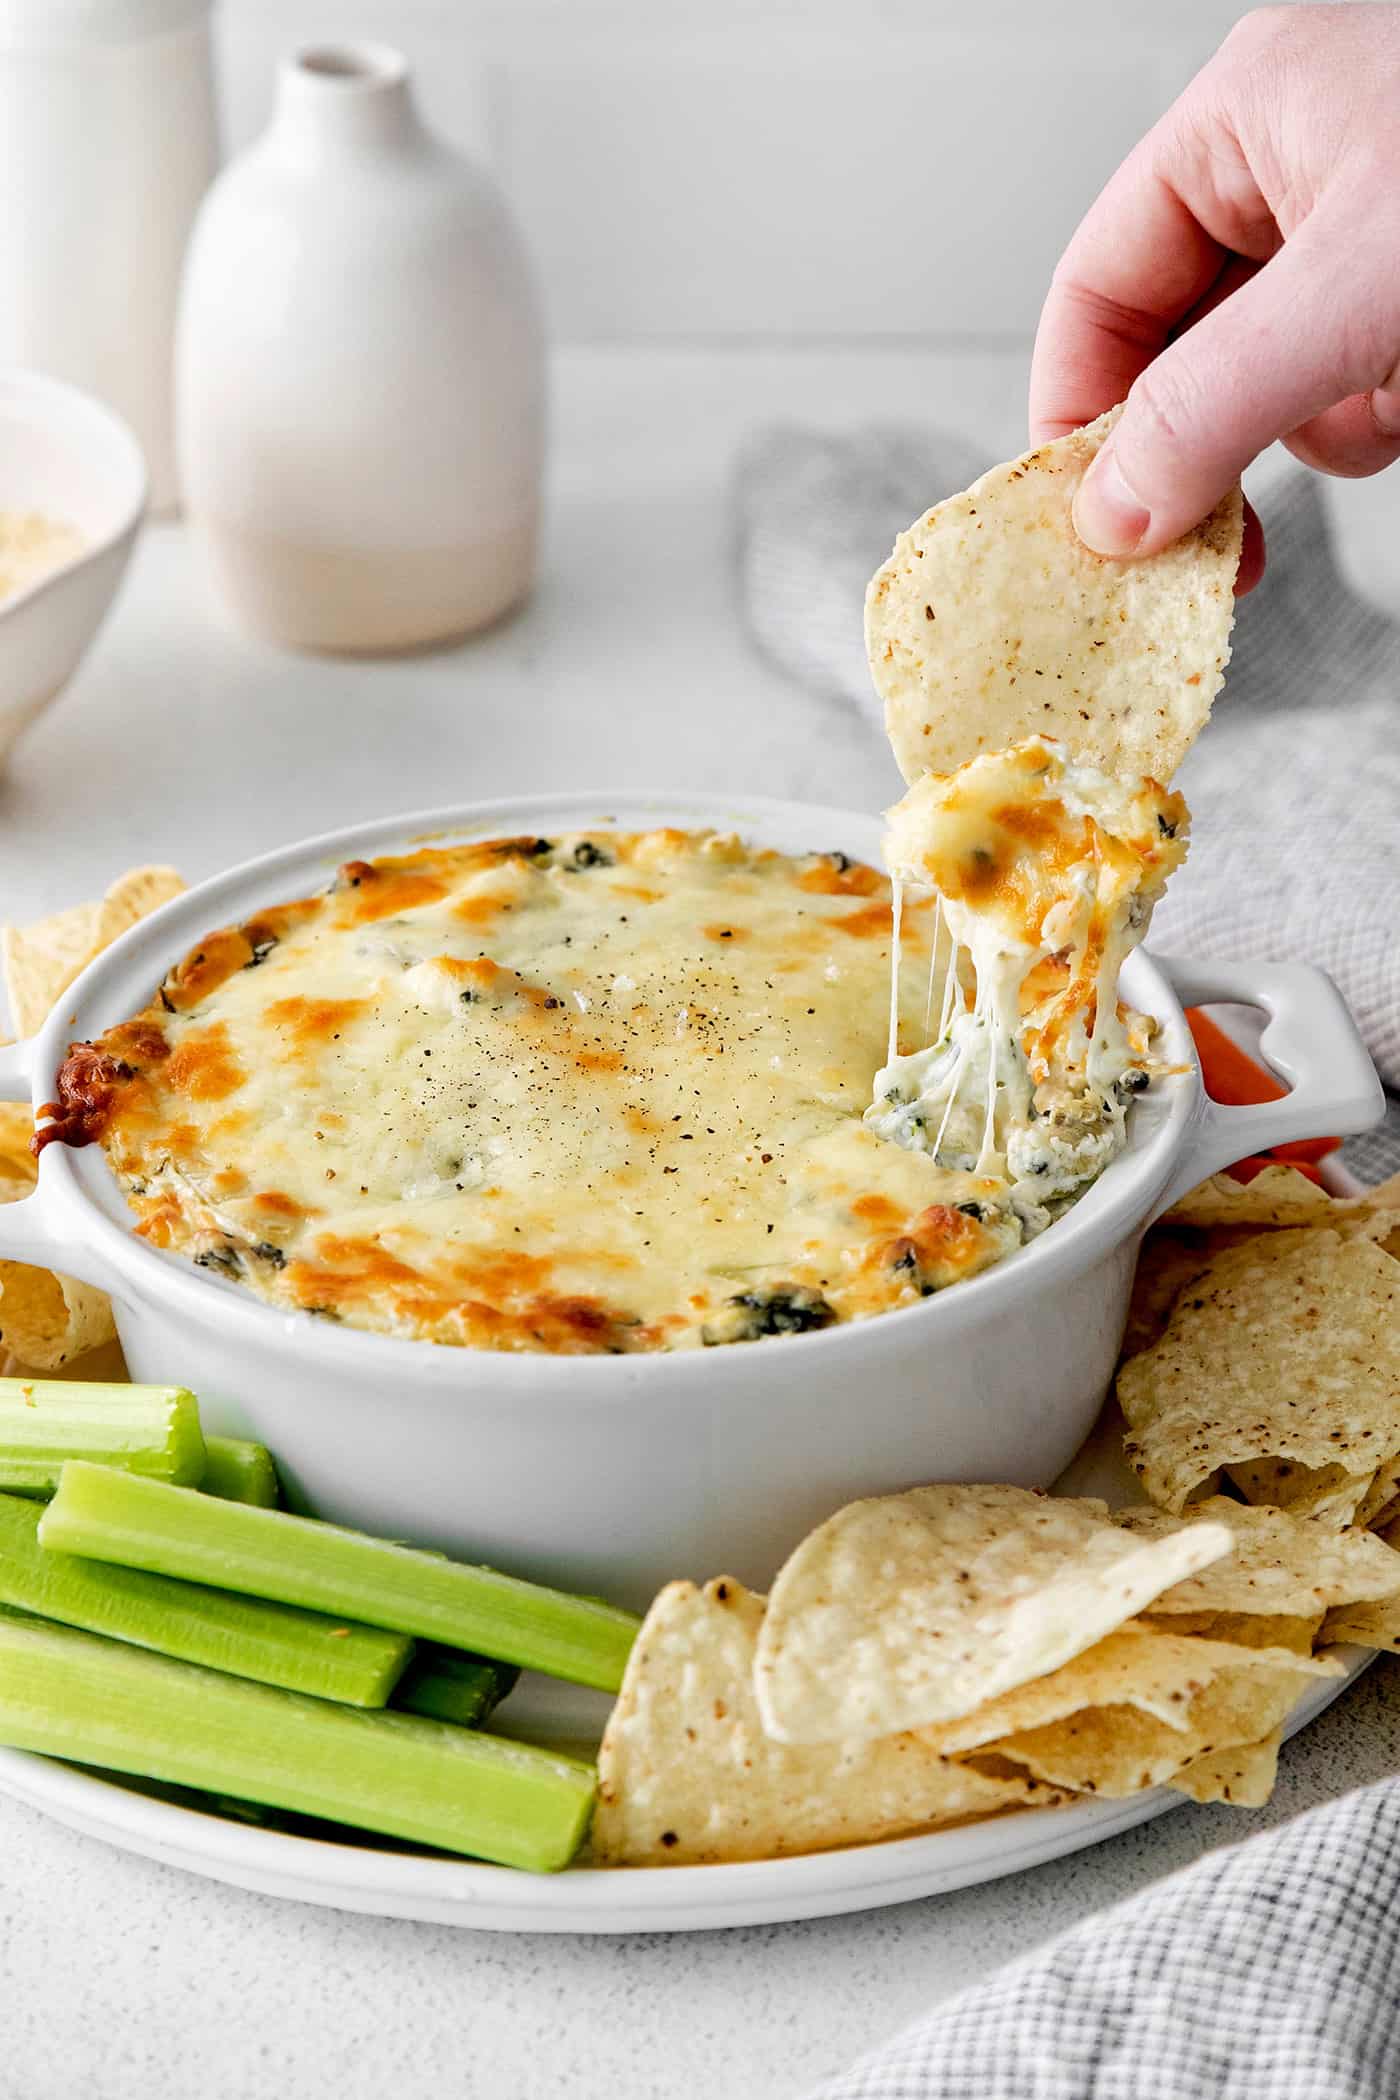 A hand dipping a chip into  a dish of spinach artichoke dip